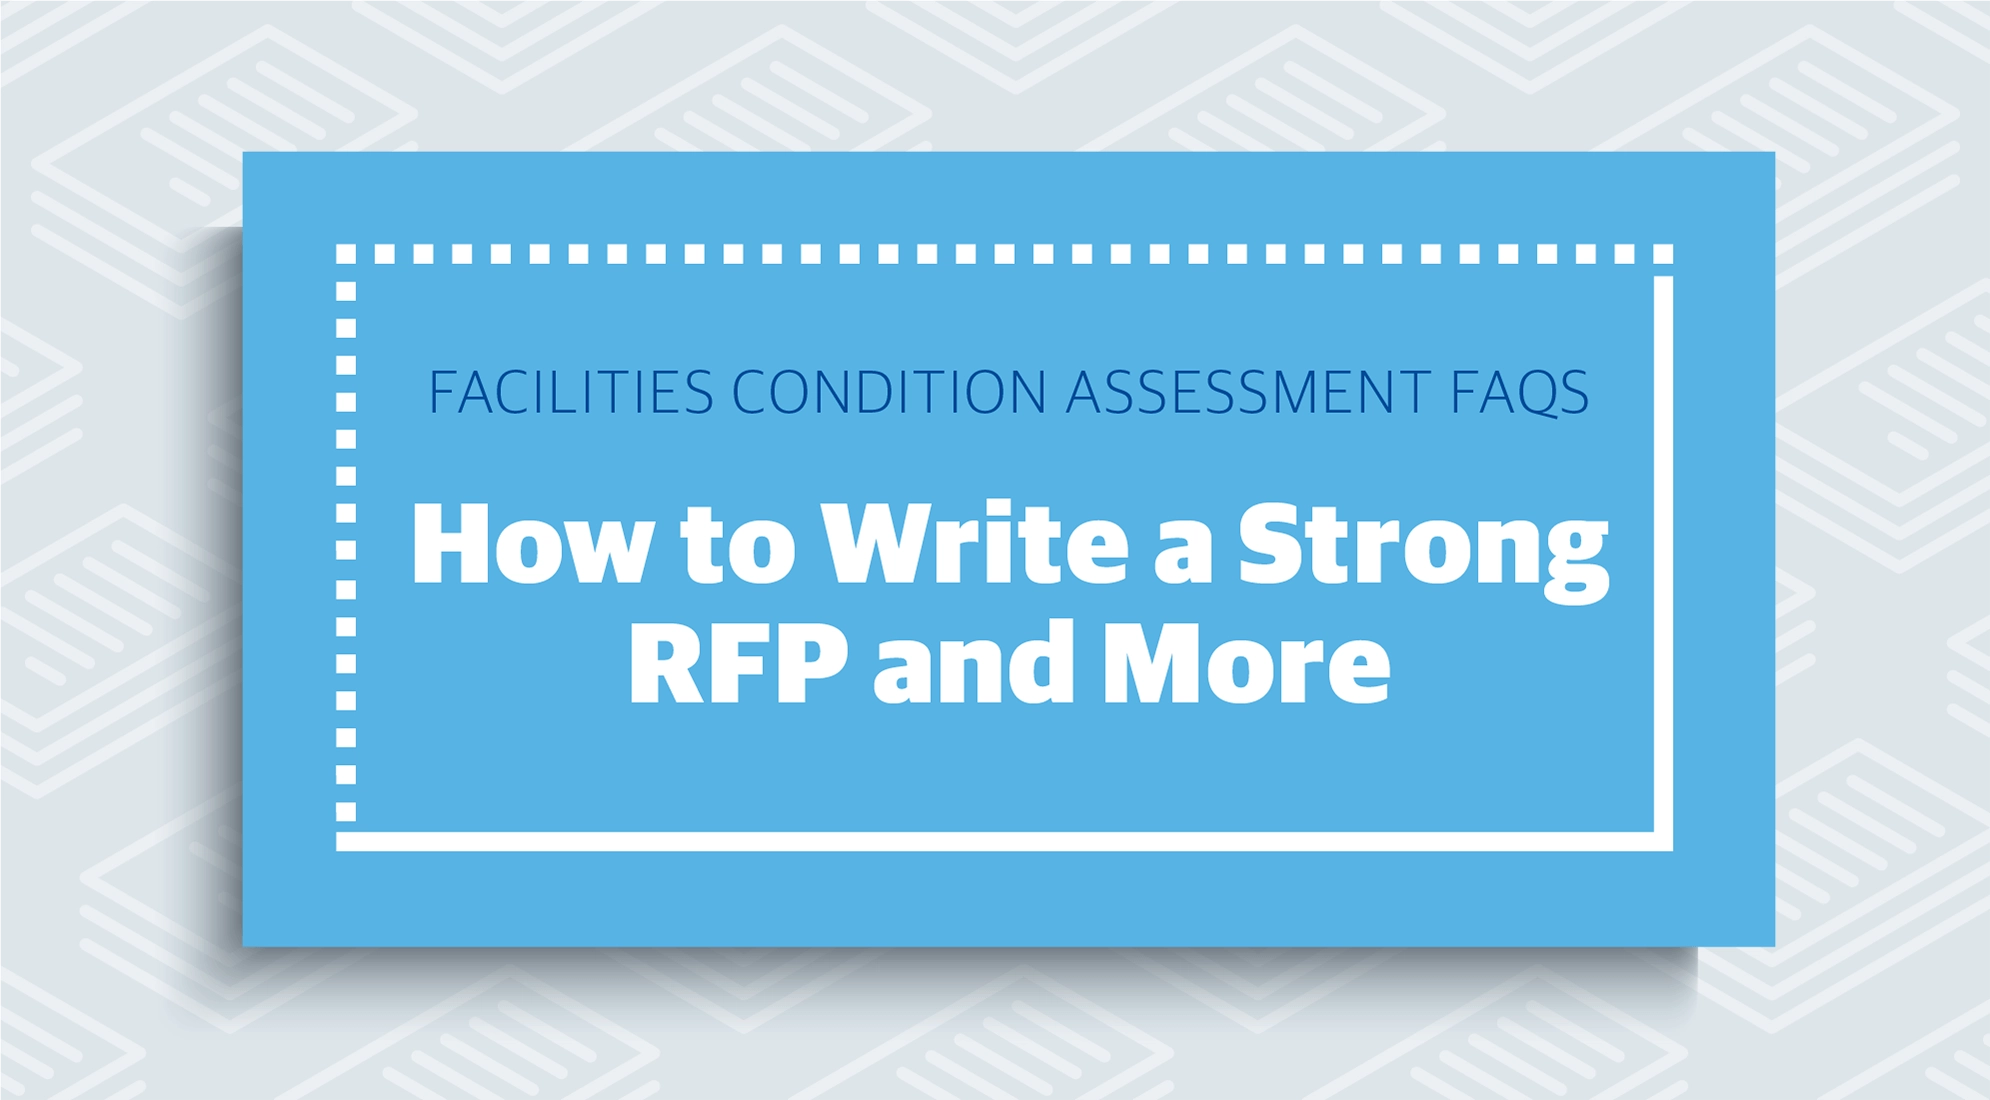 Learn how to write a strong RFP.